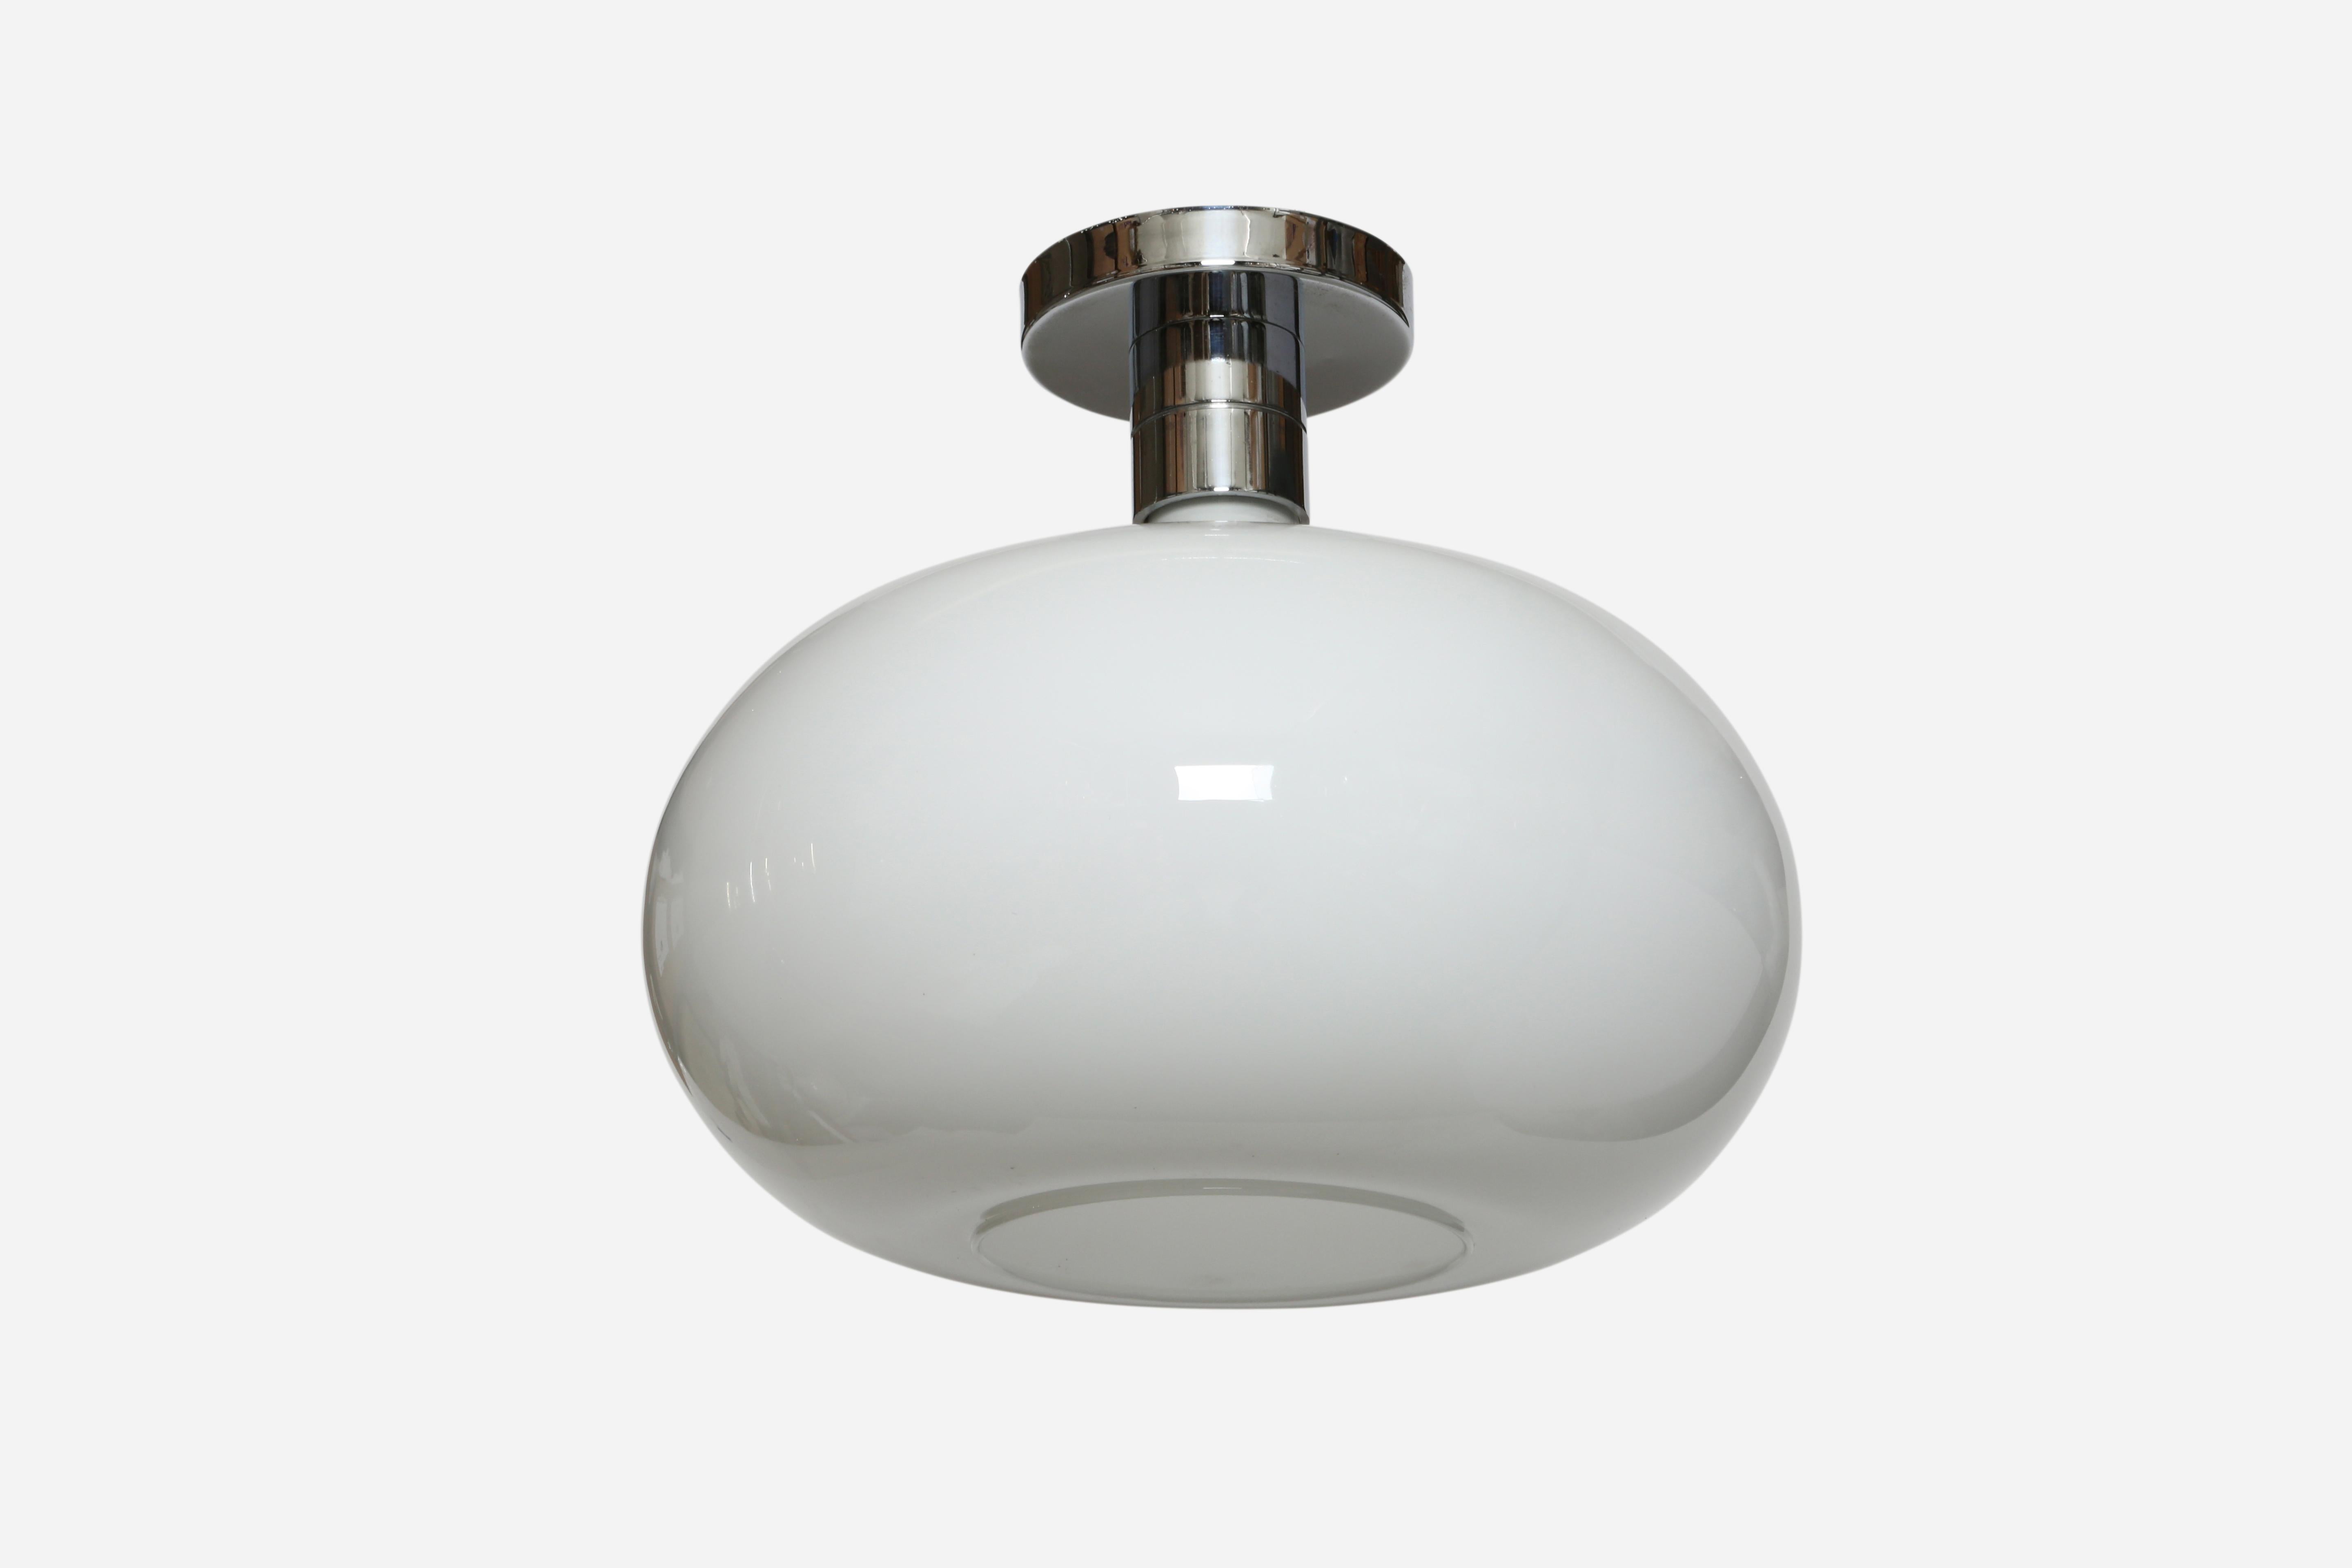 Franco Albini & Franca Helg for Sirrah AM/AS ceiling light.
Model AM5N
Designed and manufactured in Italy, 1960s.
Handblown glass and chrome plated metal.
One medium base socket.
Complimentary US rewiring upon request.

We take pride in bringing